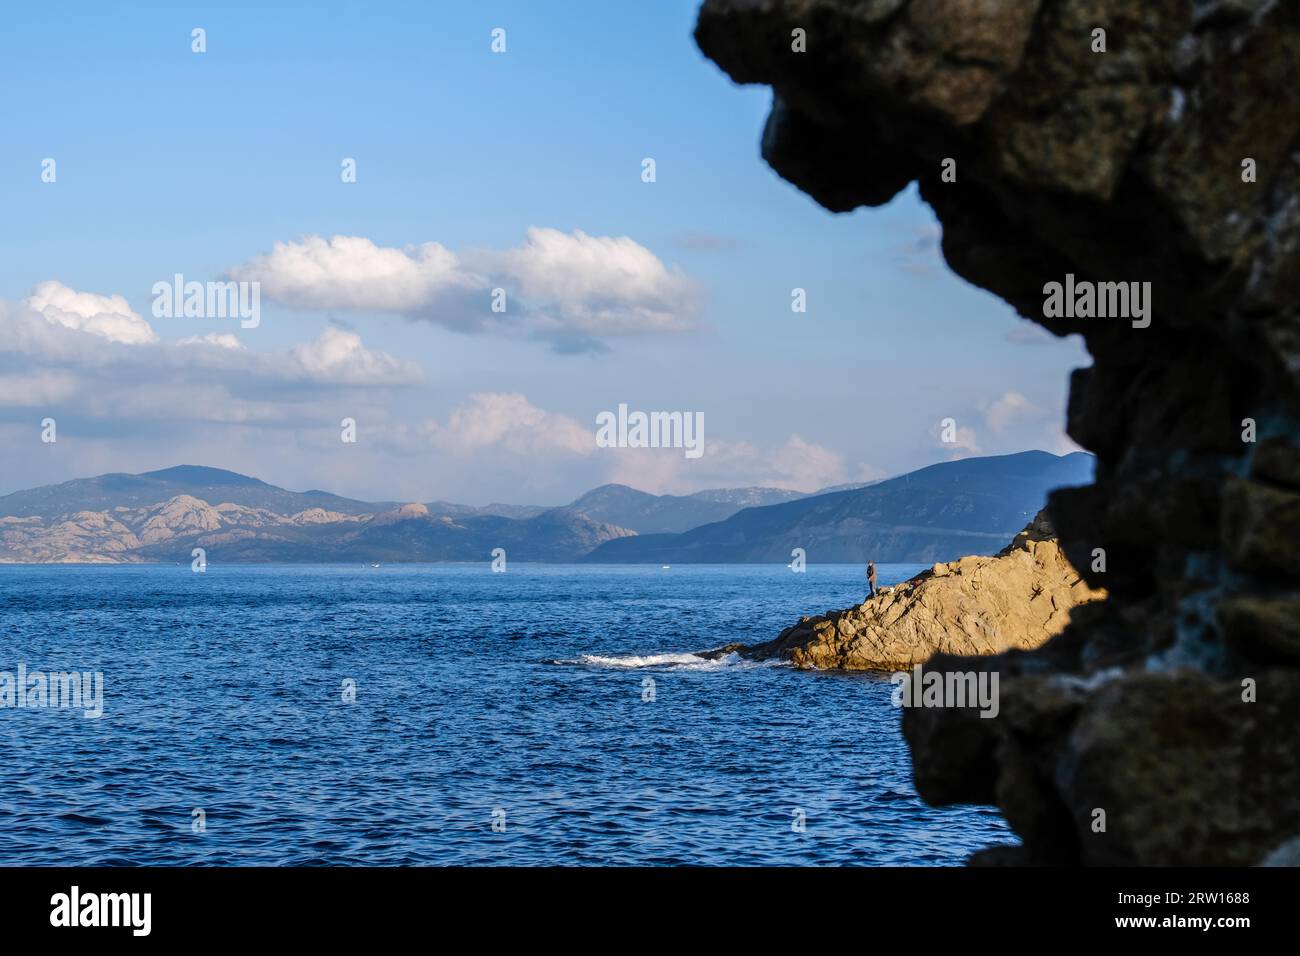 View of the Mediterranean Sea and the north side of the Mediterranean island Corsica, France Stock Photo